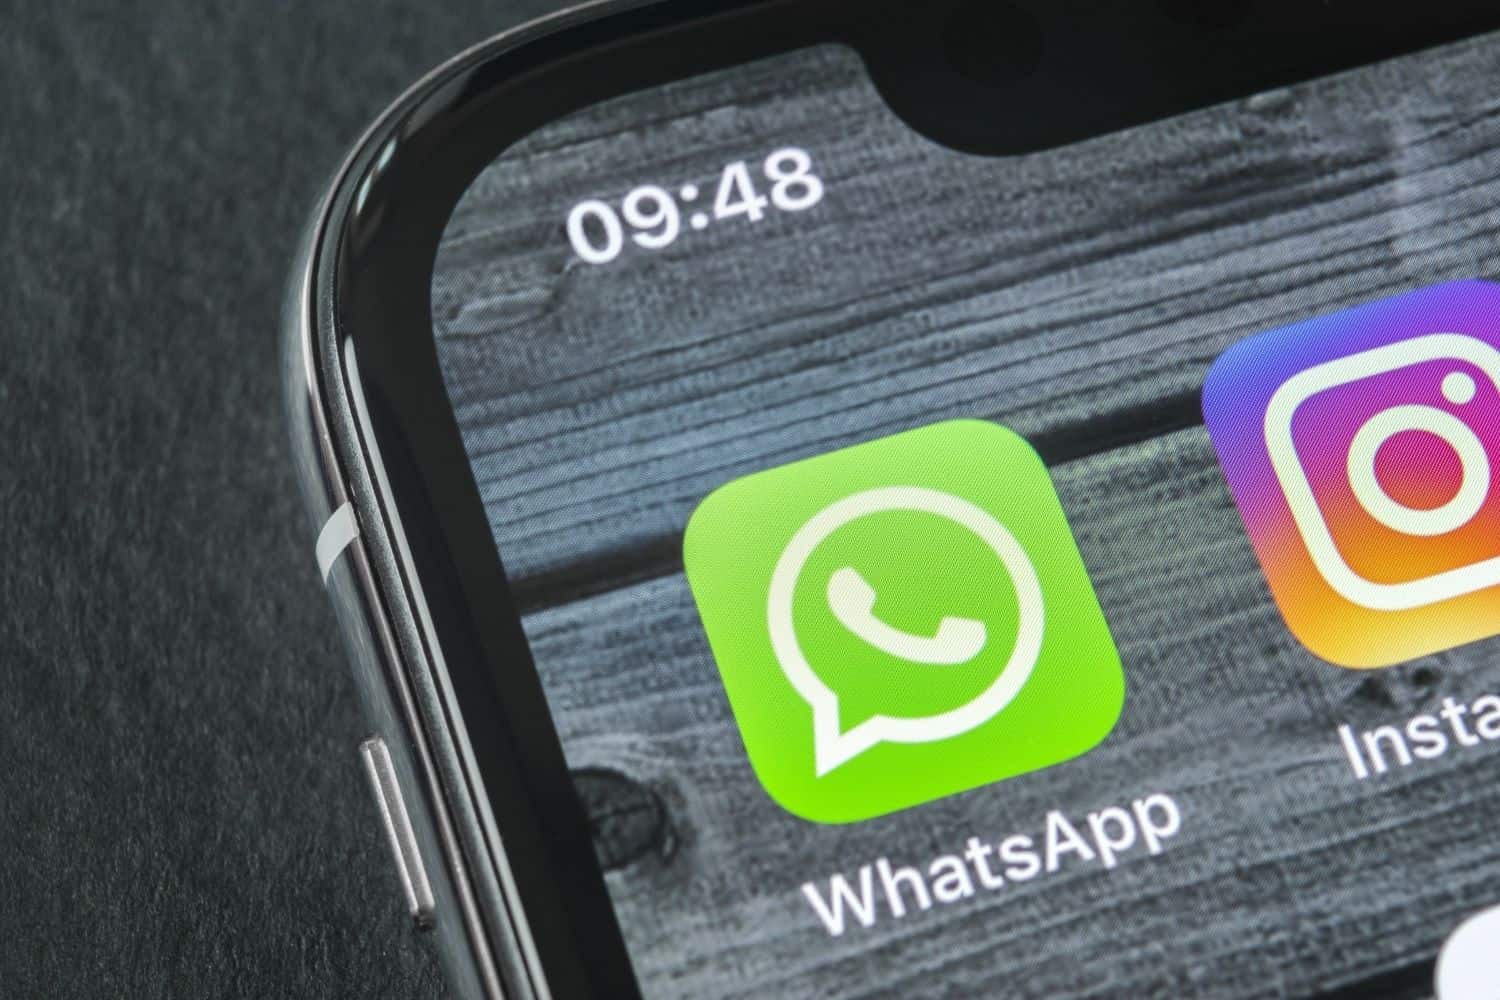 7 WhatsApp Features to be Released by end of 2021